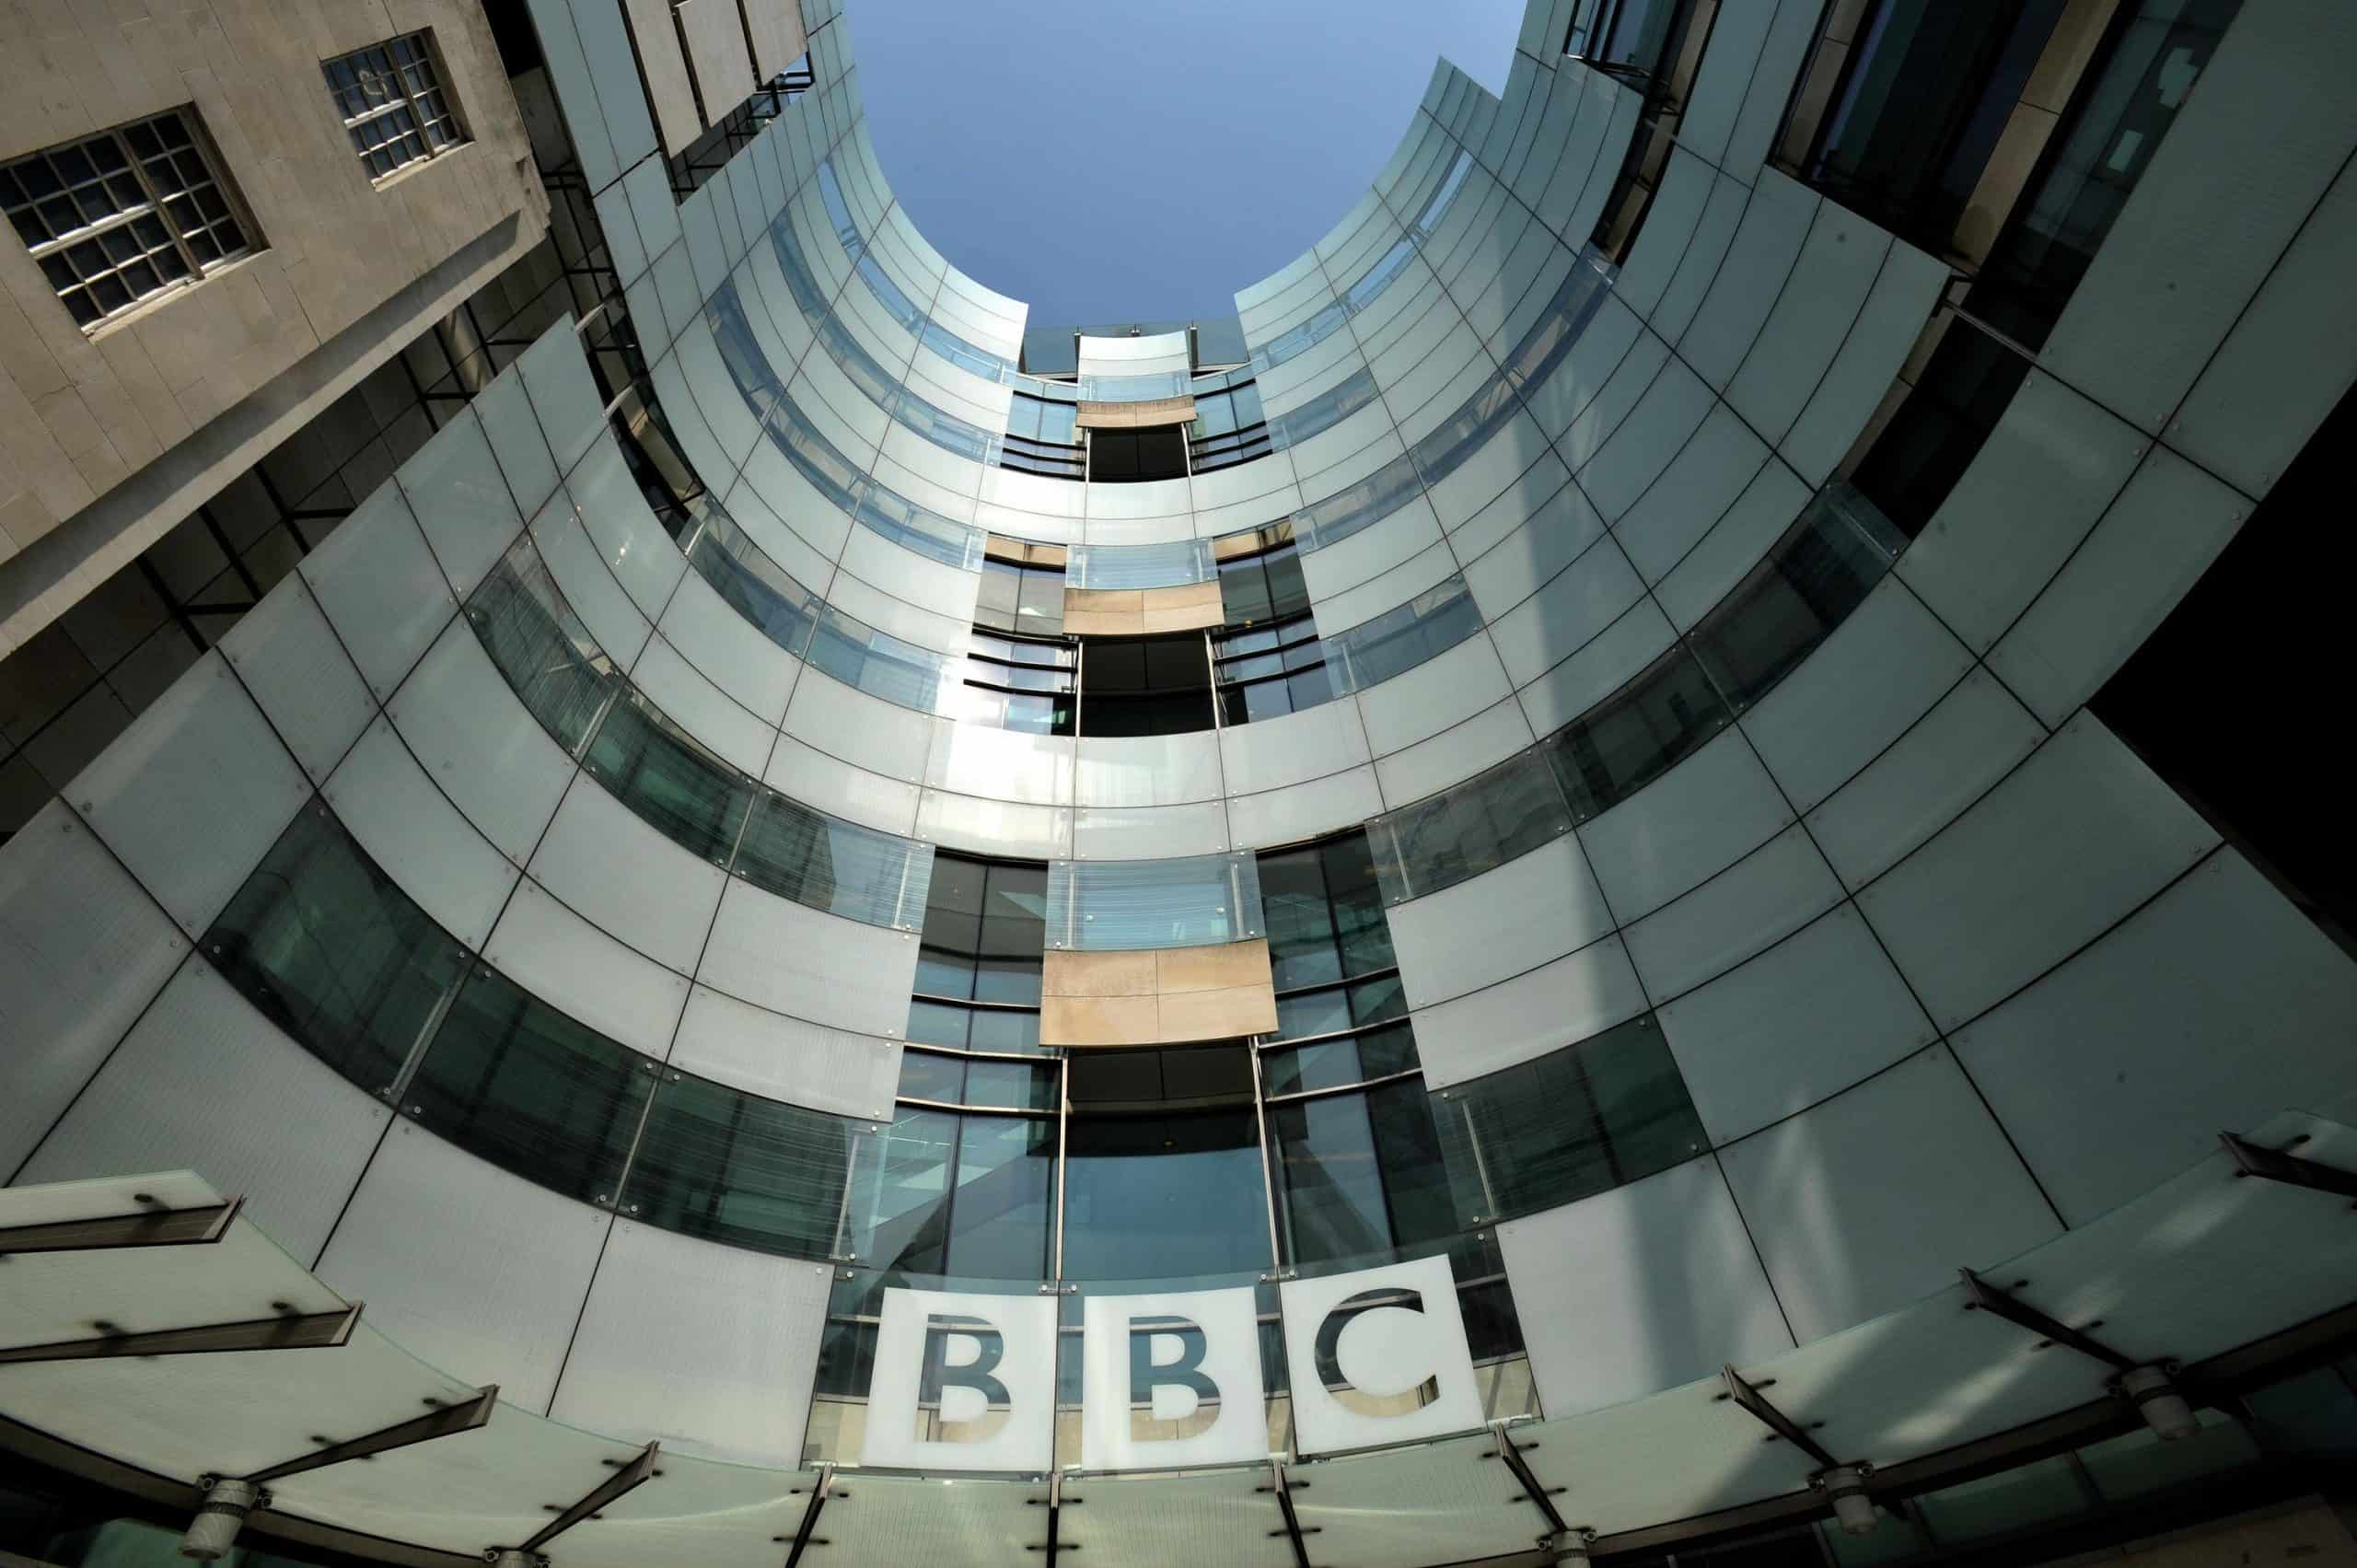 End of BBC? Tory peer appointed chairman of Ofcom after ‘broken’ recruitment process